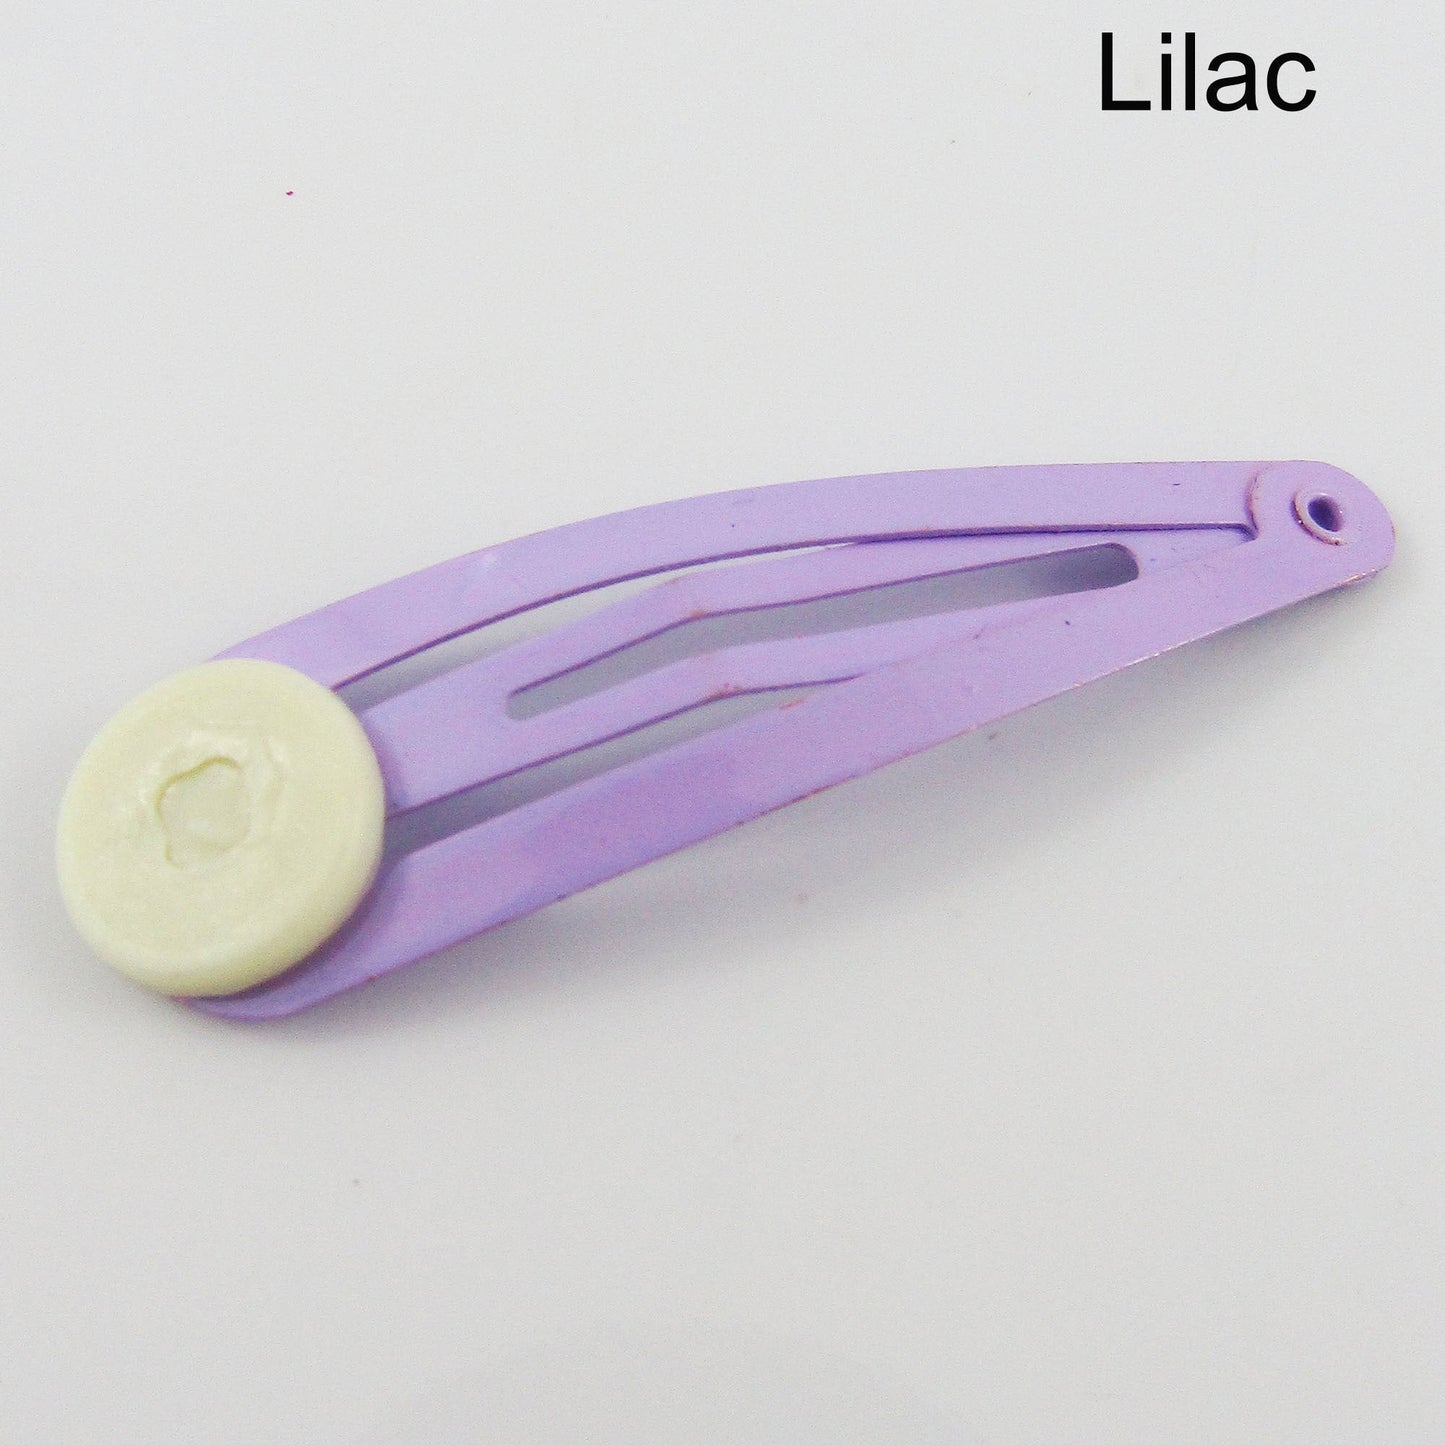 Bulk 10pcs Painted Snap Hair Clip Finding with Acrylic Glue Pad Pick Colour